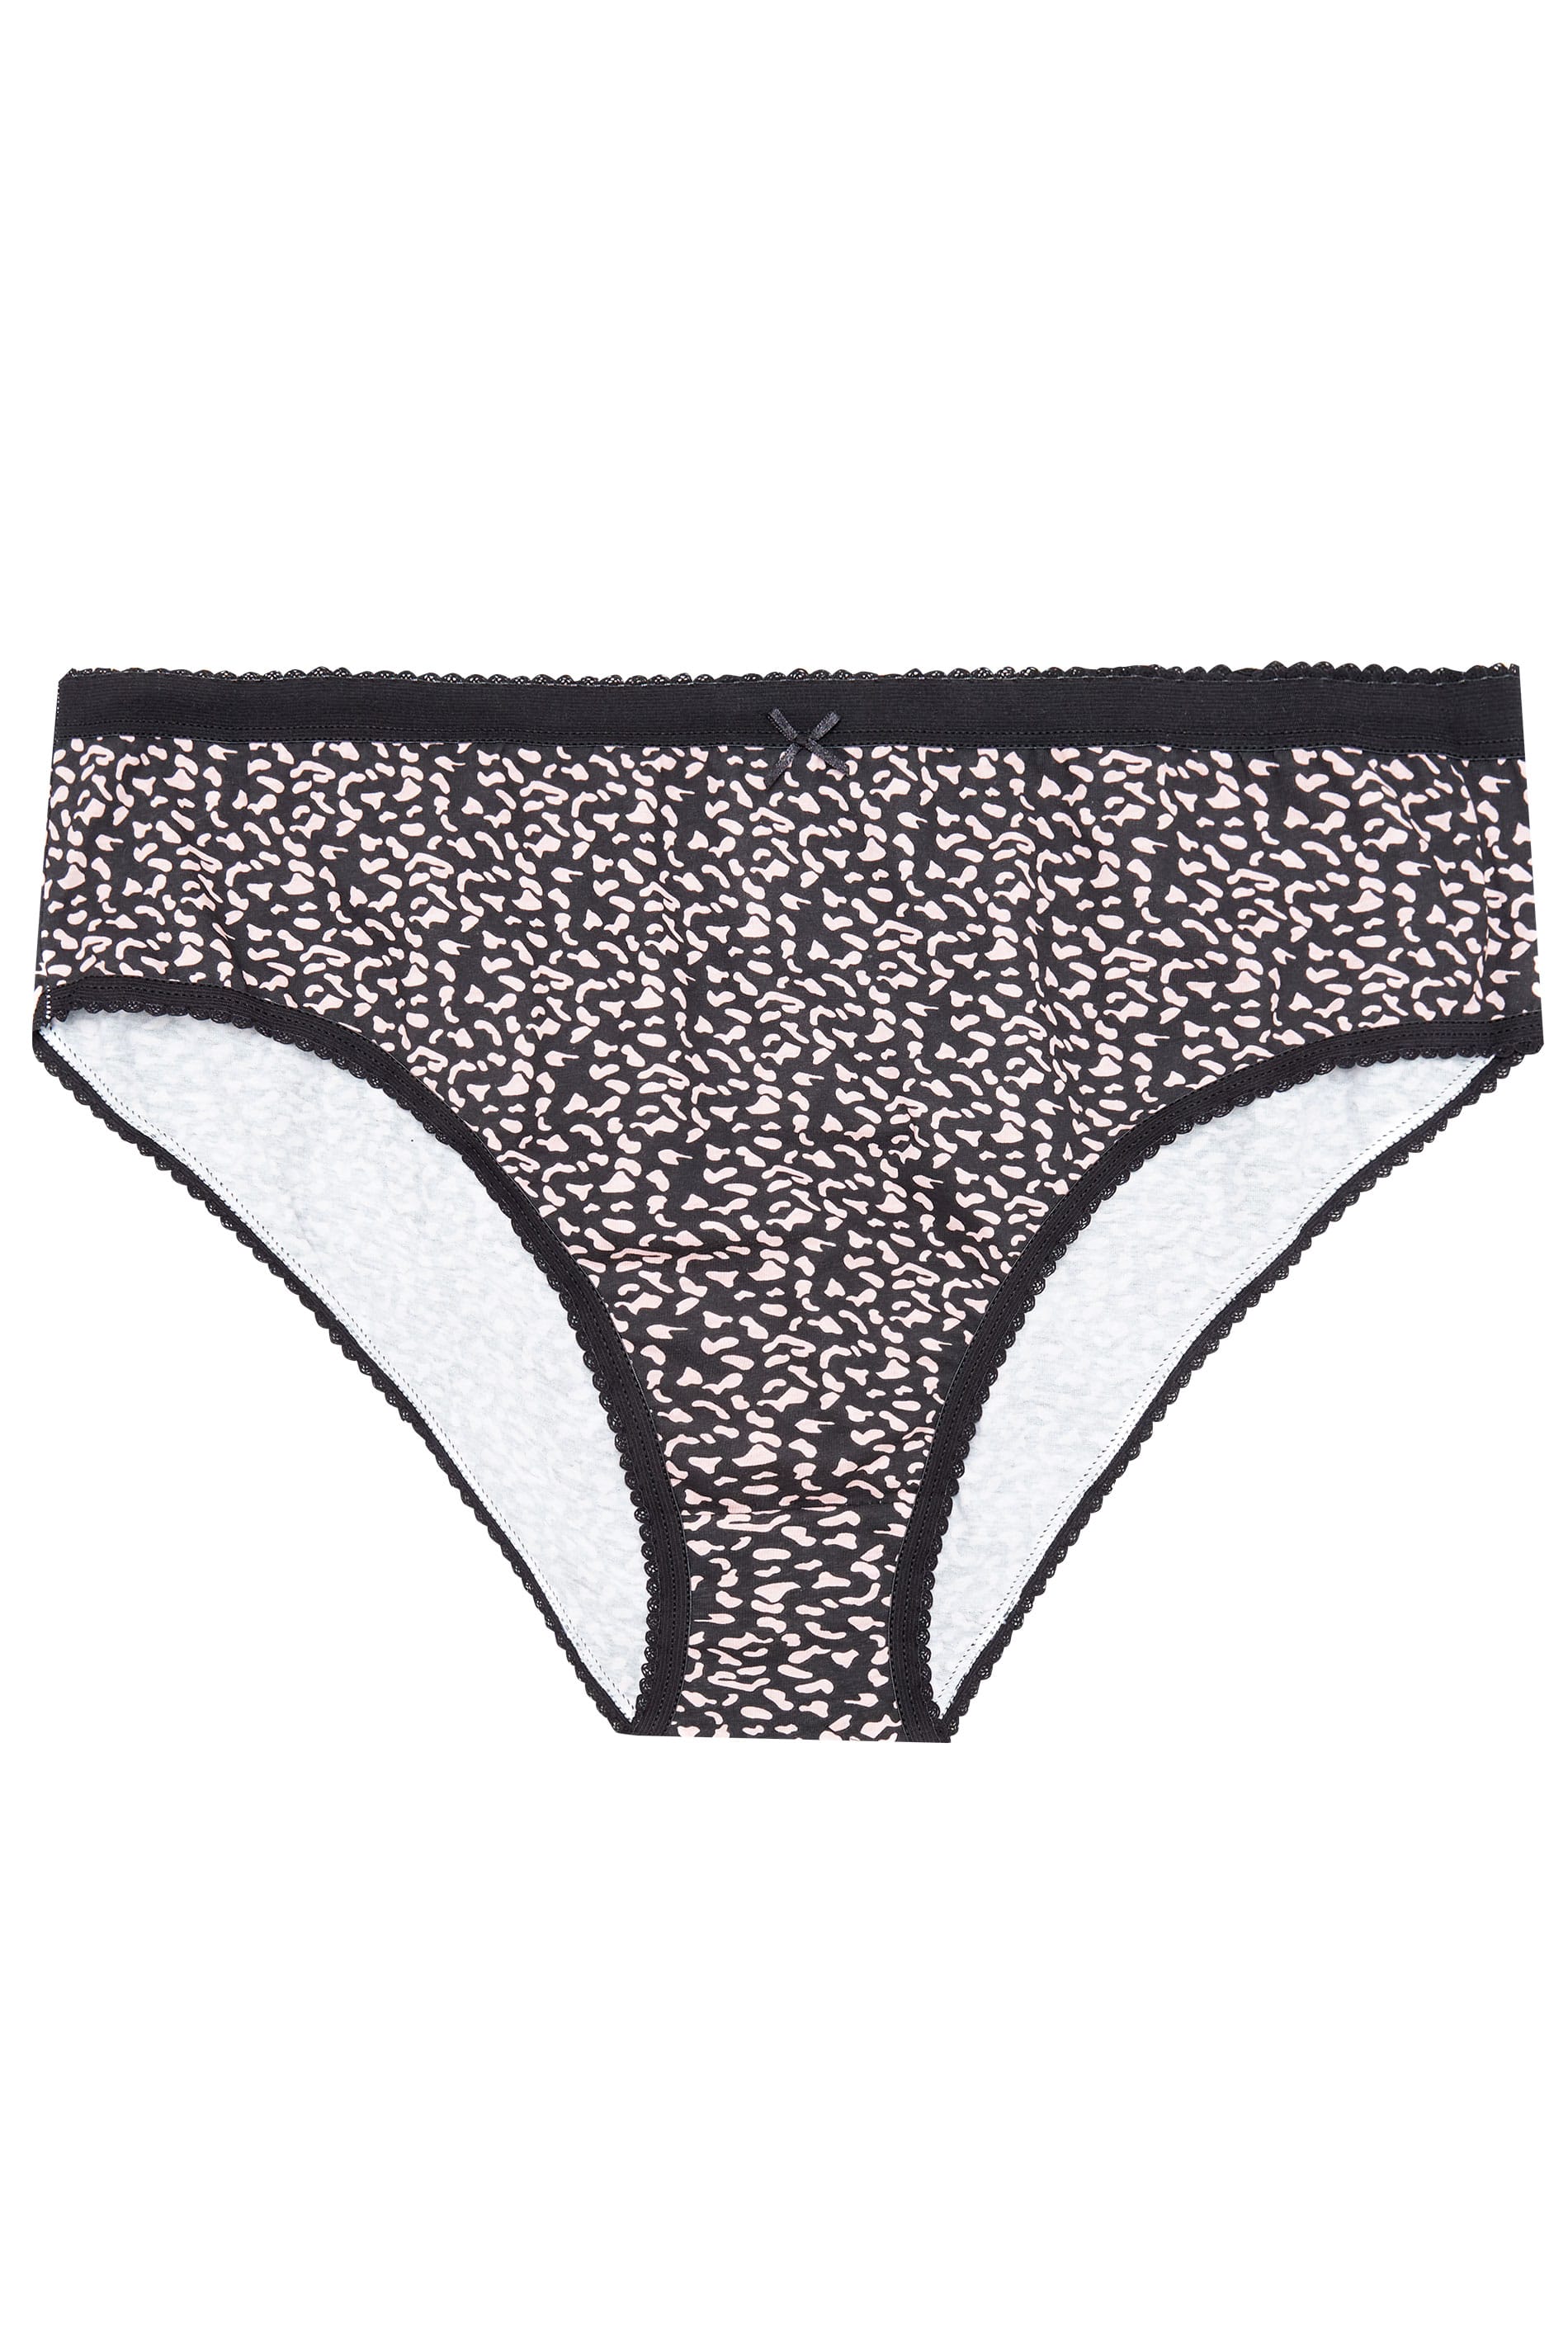 5 PACK Black Animal Print High Leg Briefs | Yours Clothing